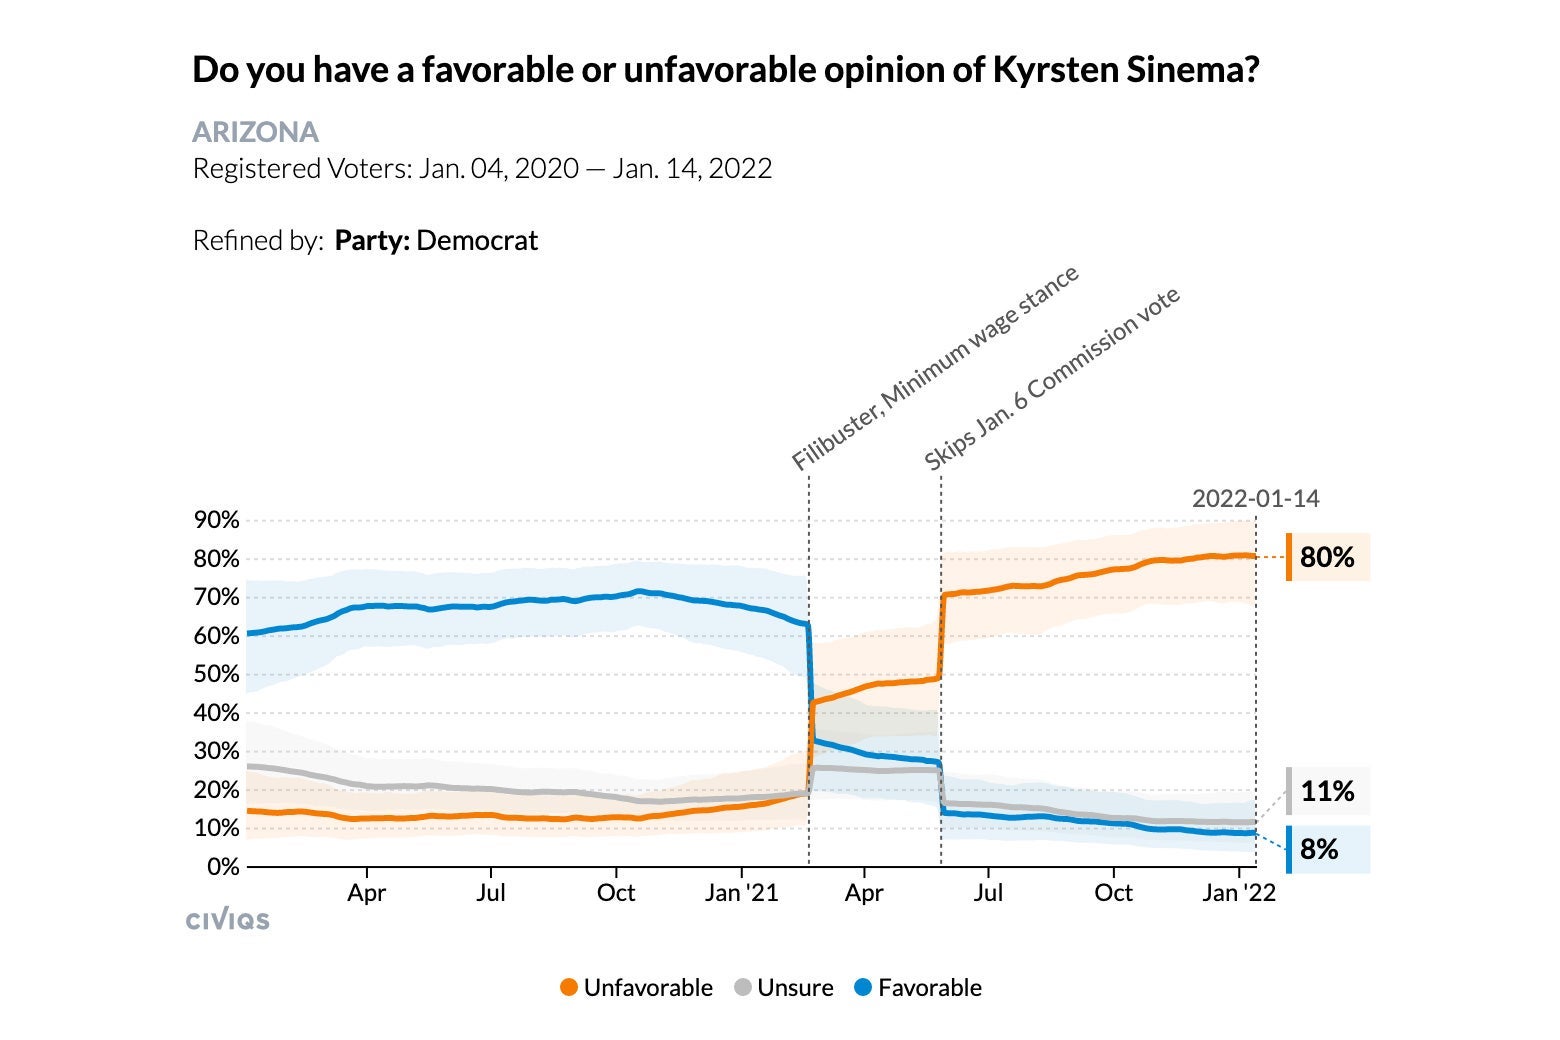 A graph showing Kyrsten Sinema's favorability rating over time among Arizona Democrats.